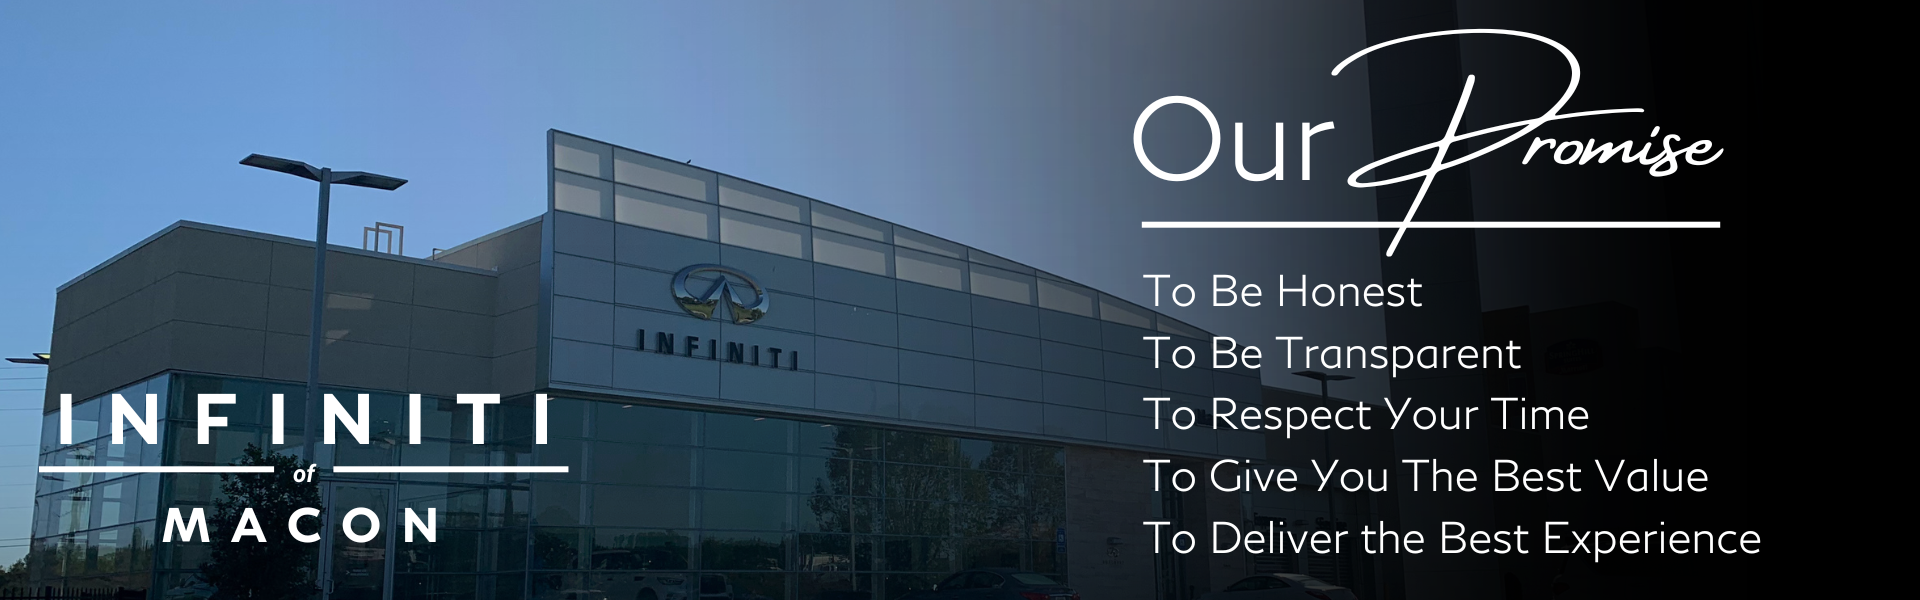 Our Promise only at Infiniti of Macon